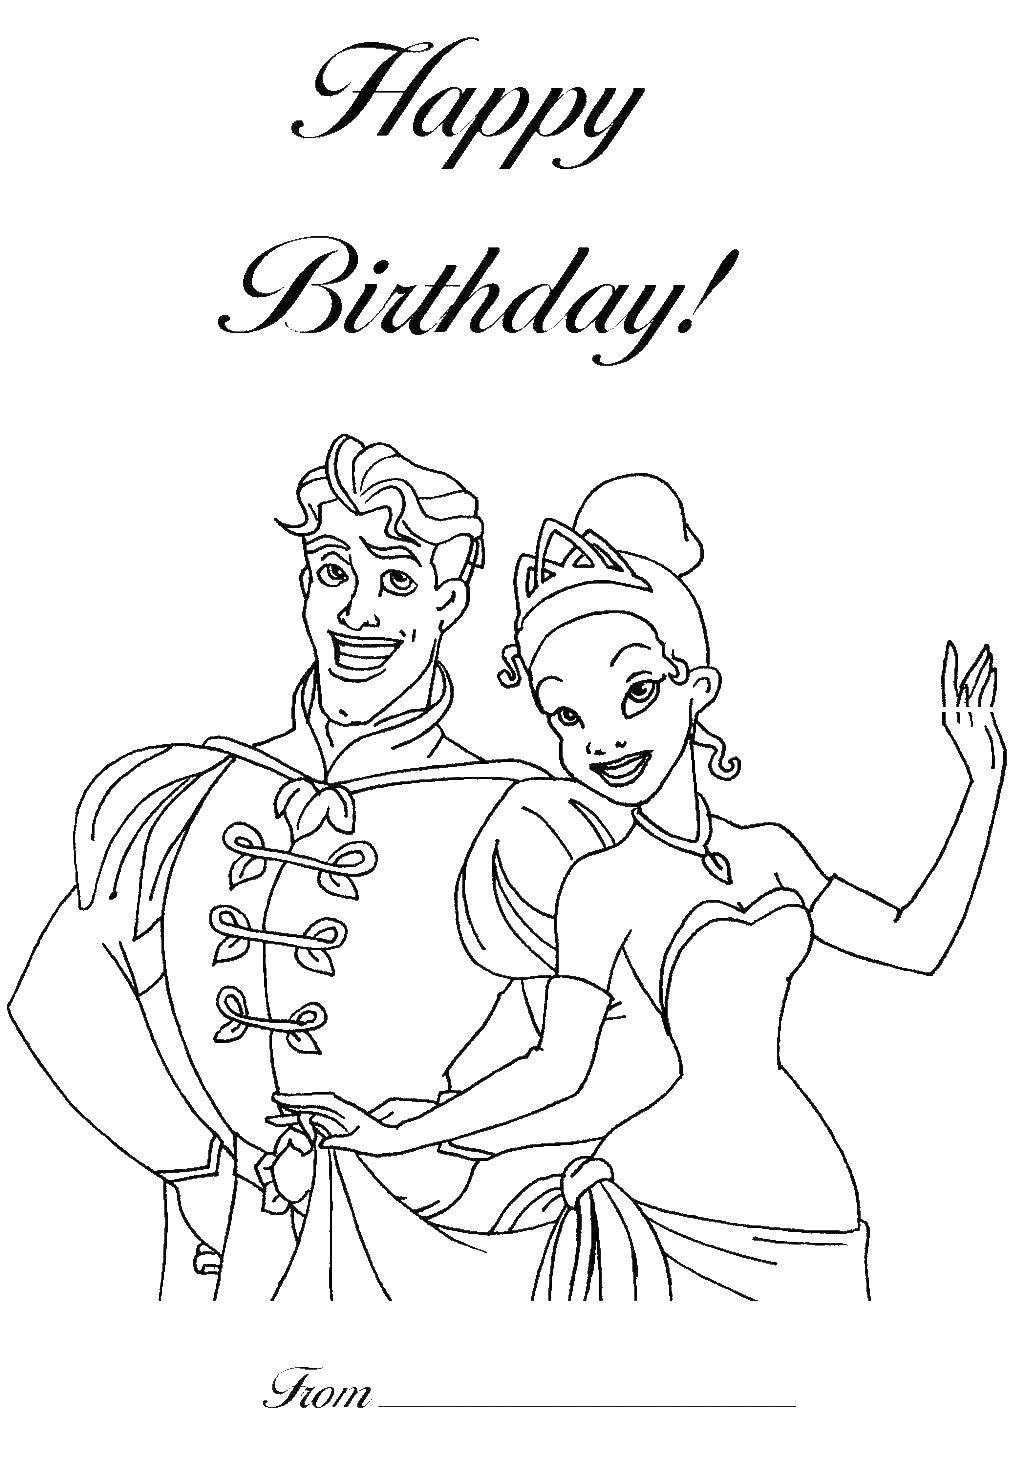 Coloring Congratulations on the birthday from Princess Tiana. Category greetings. Tags:  greeting, Princess, Tiana.